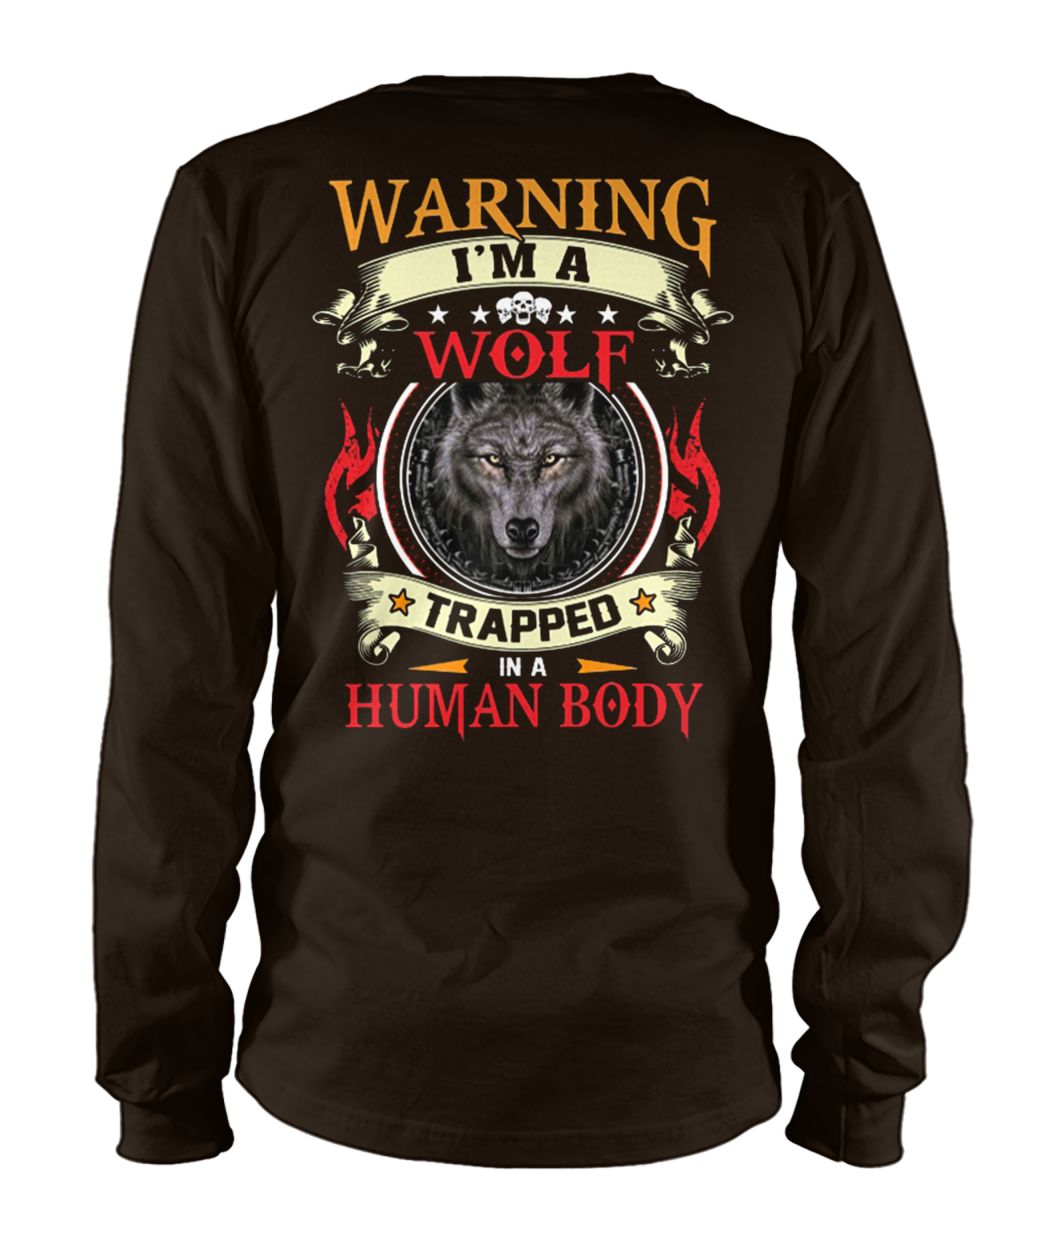 Warning I'm a wolf trapped in a human body unisex long sleeve